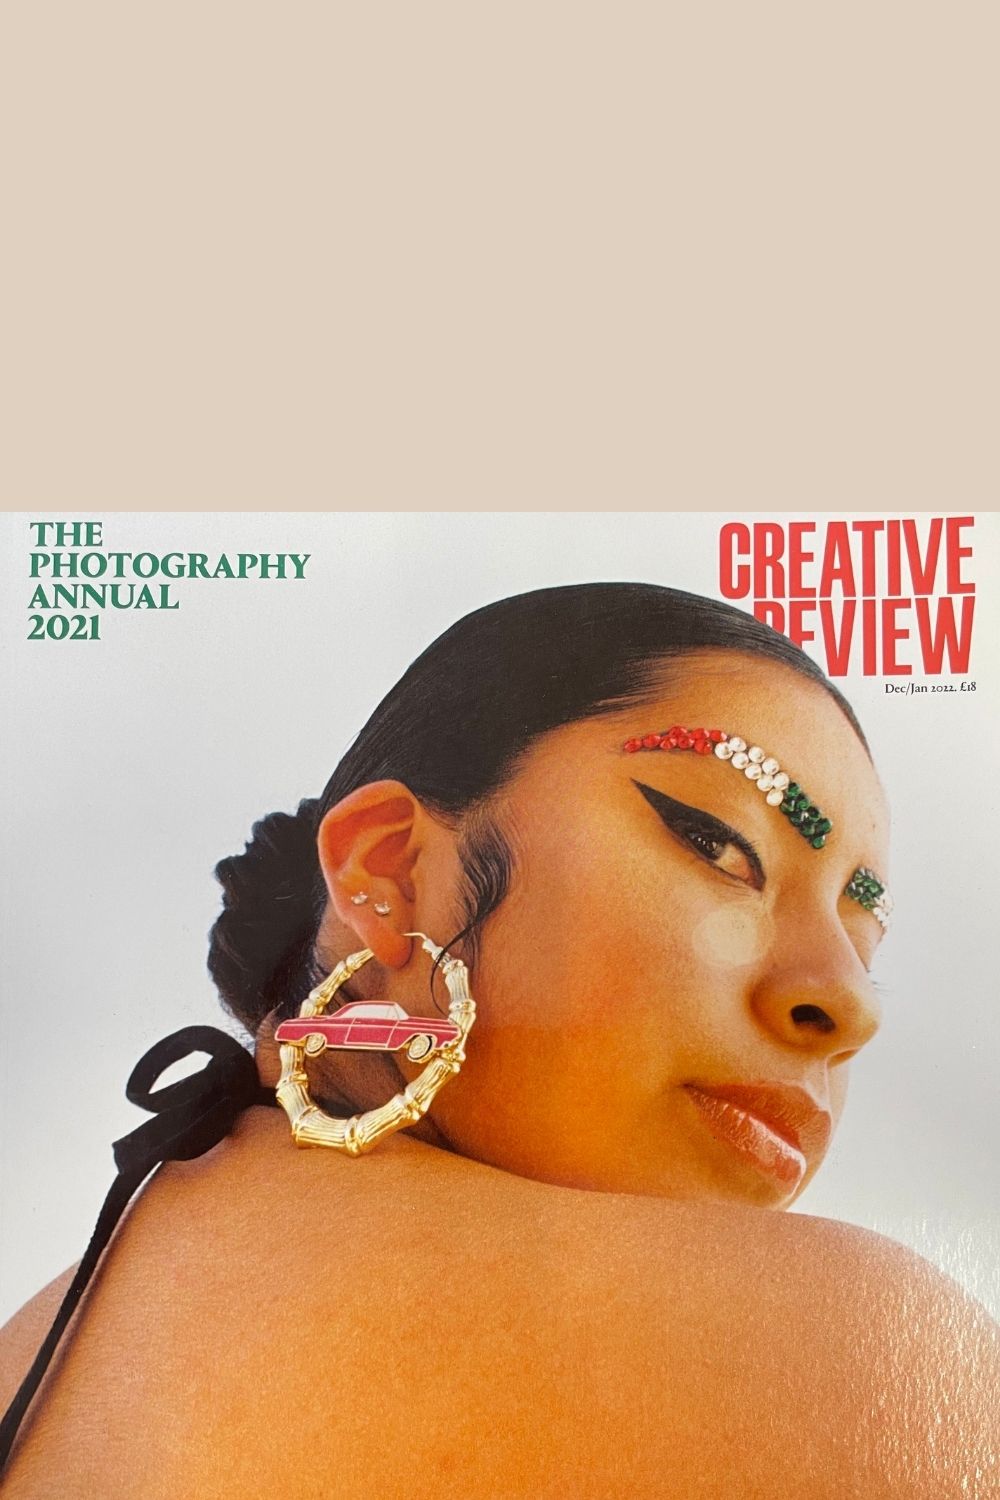 Creative Review The Photography Annual 2021